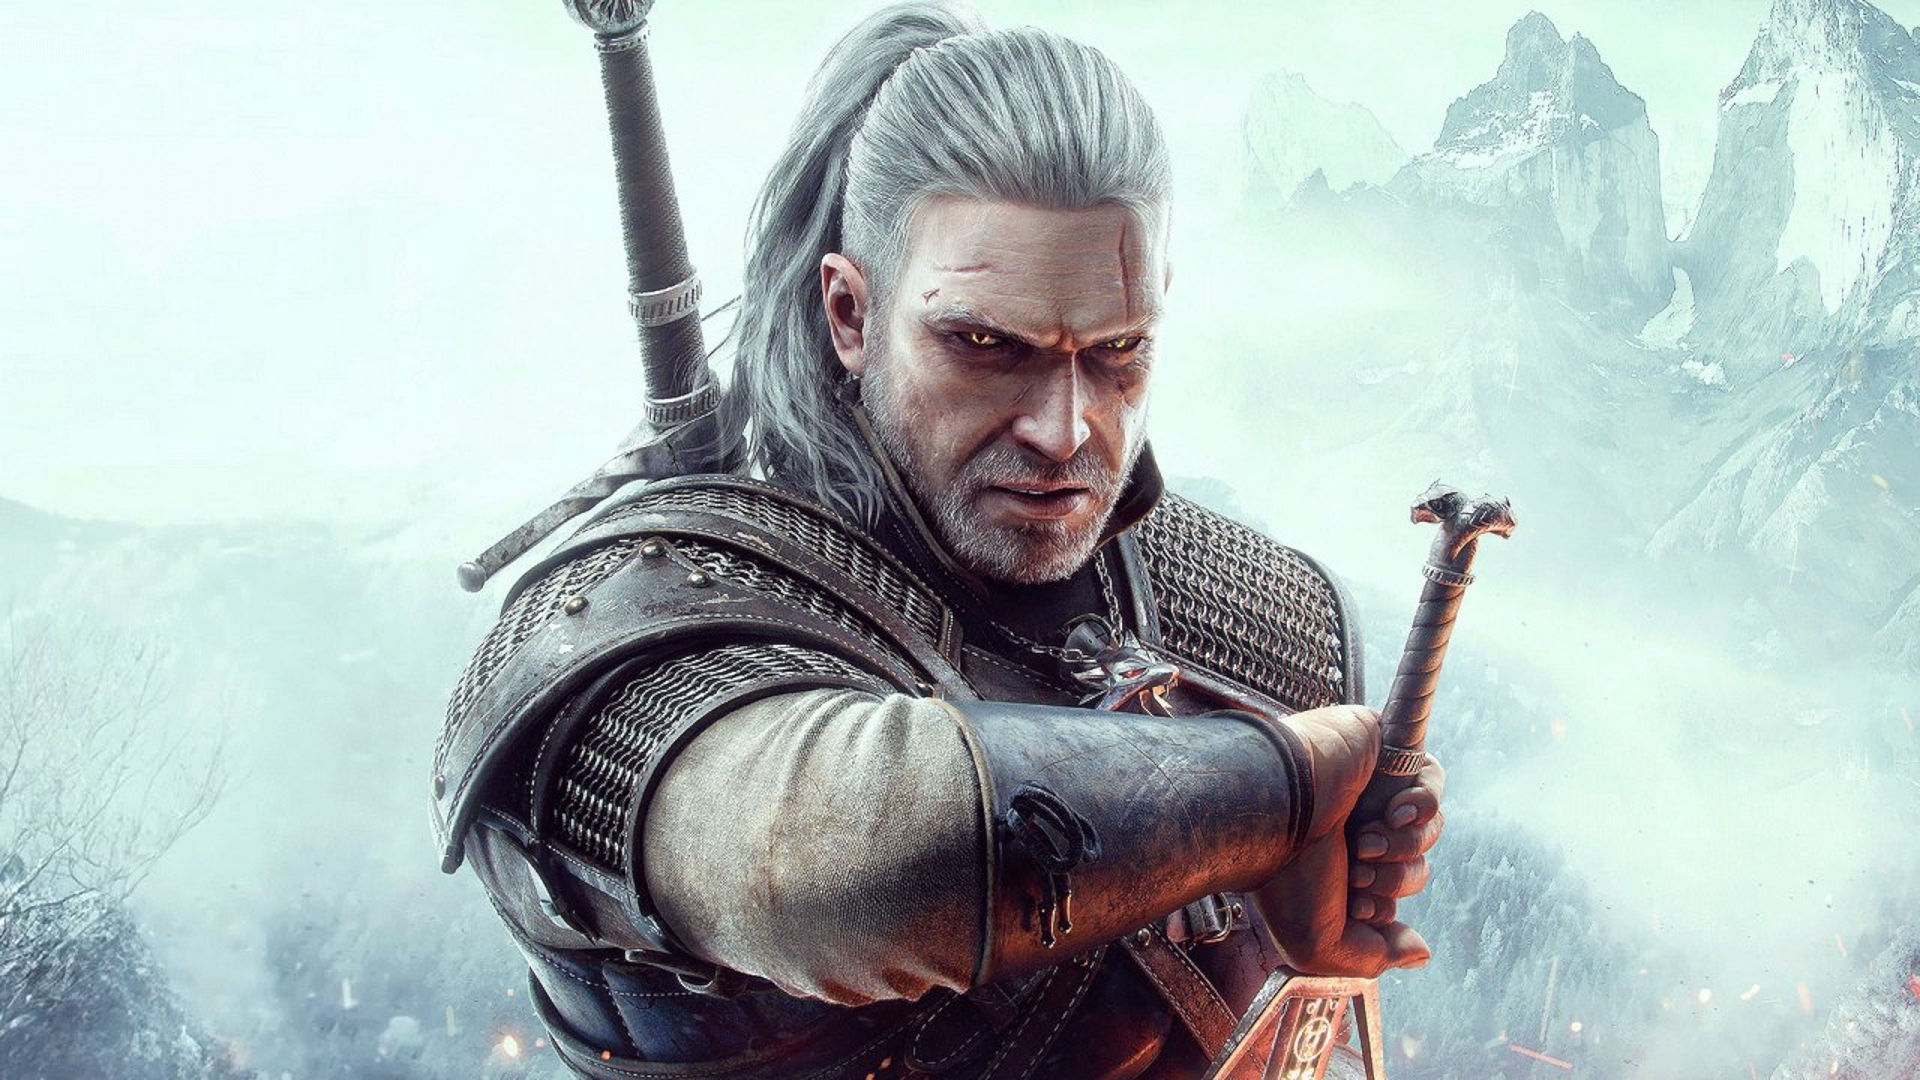 The Witcher games on Switch and mobile 2023